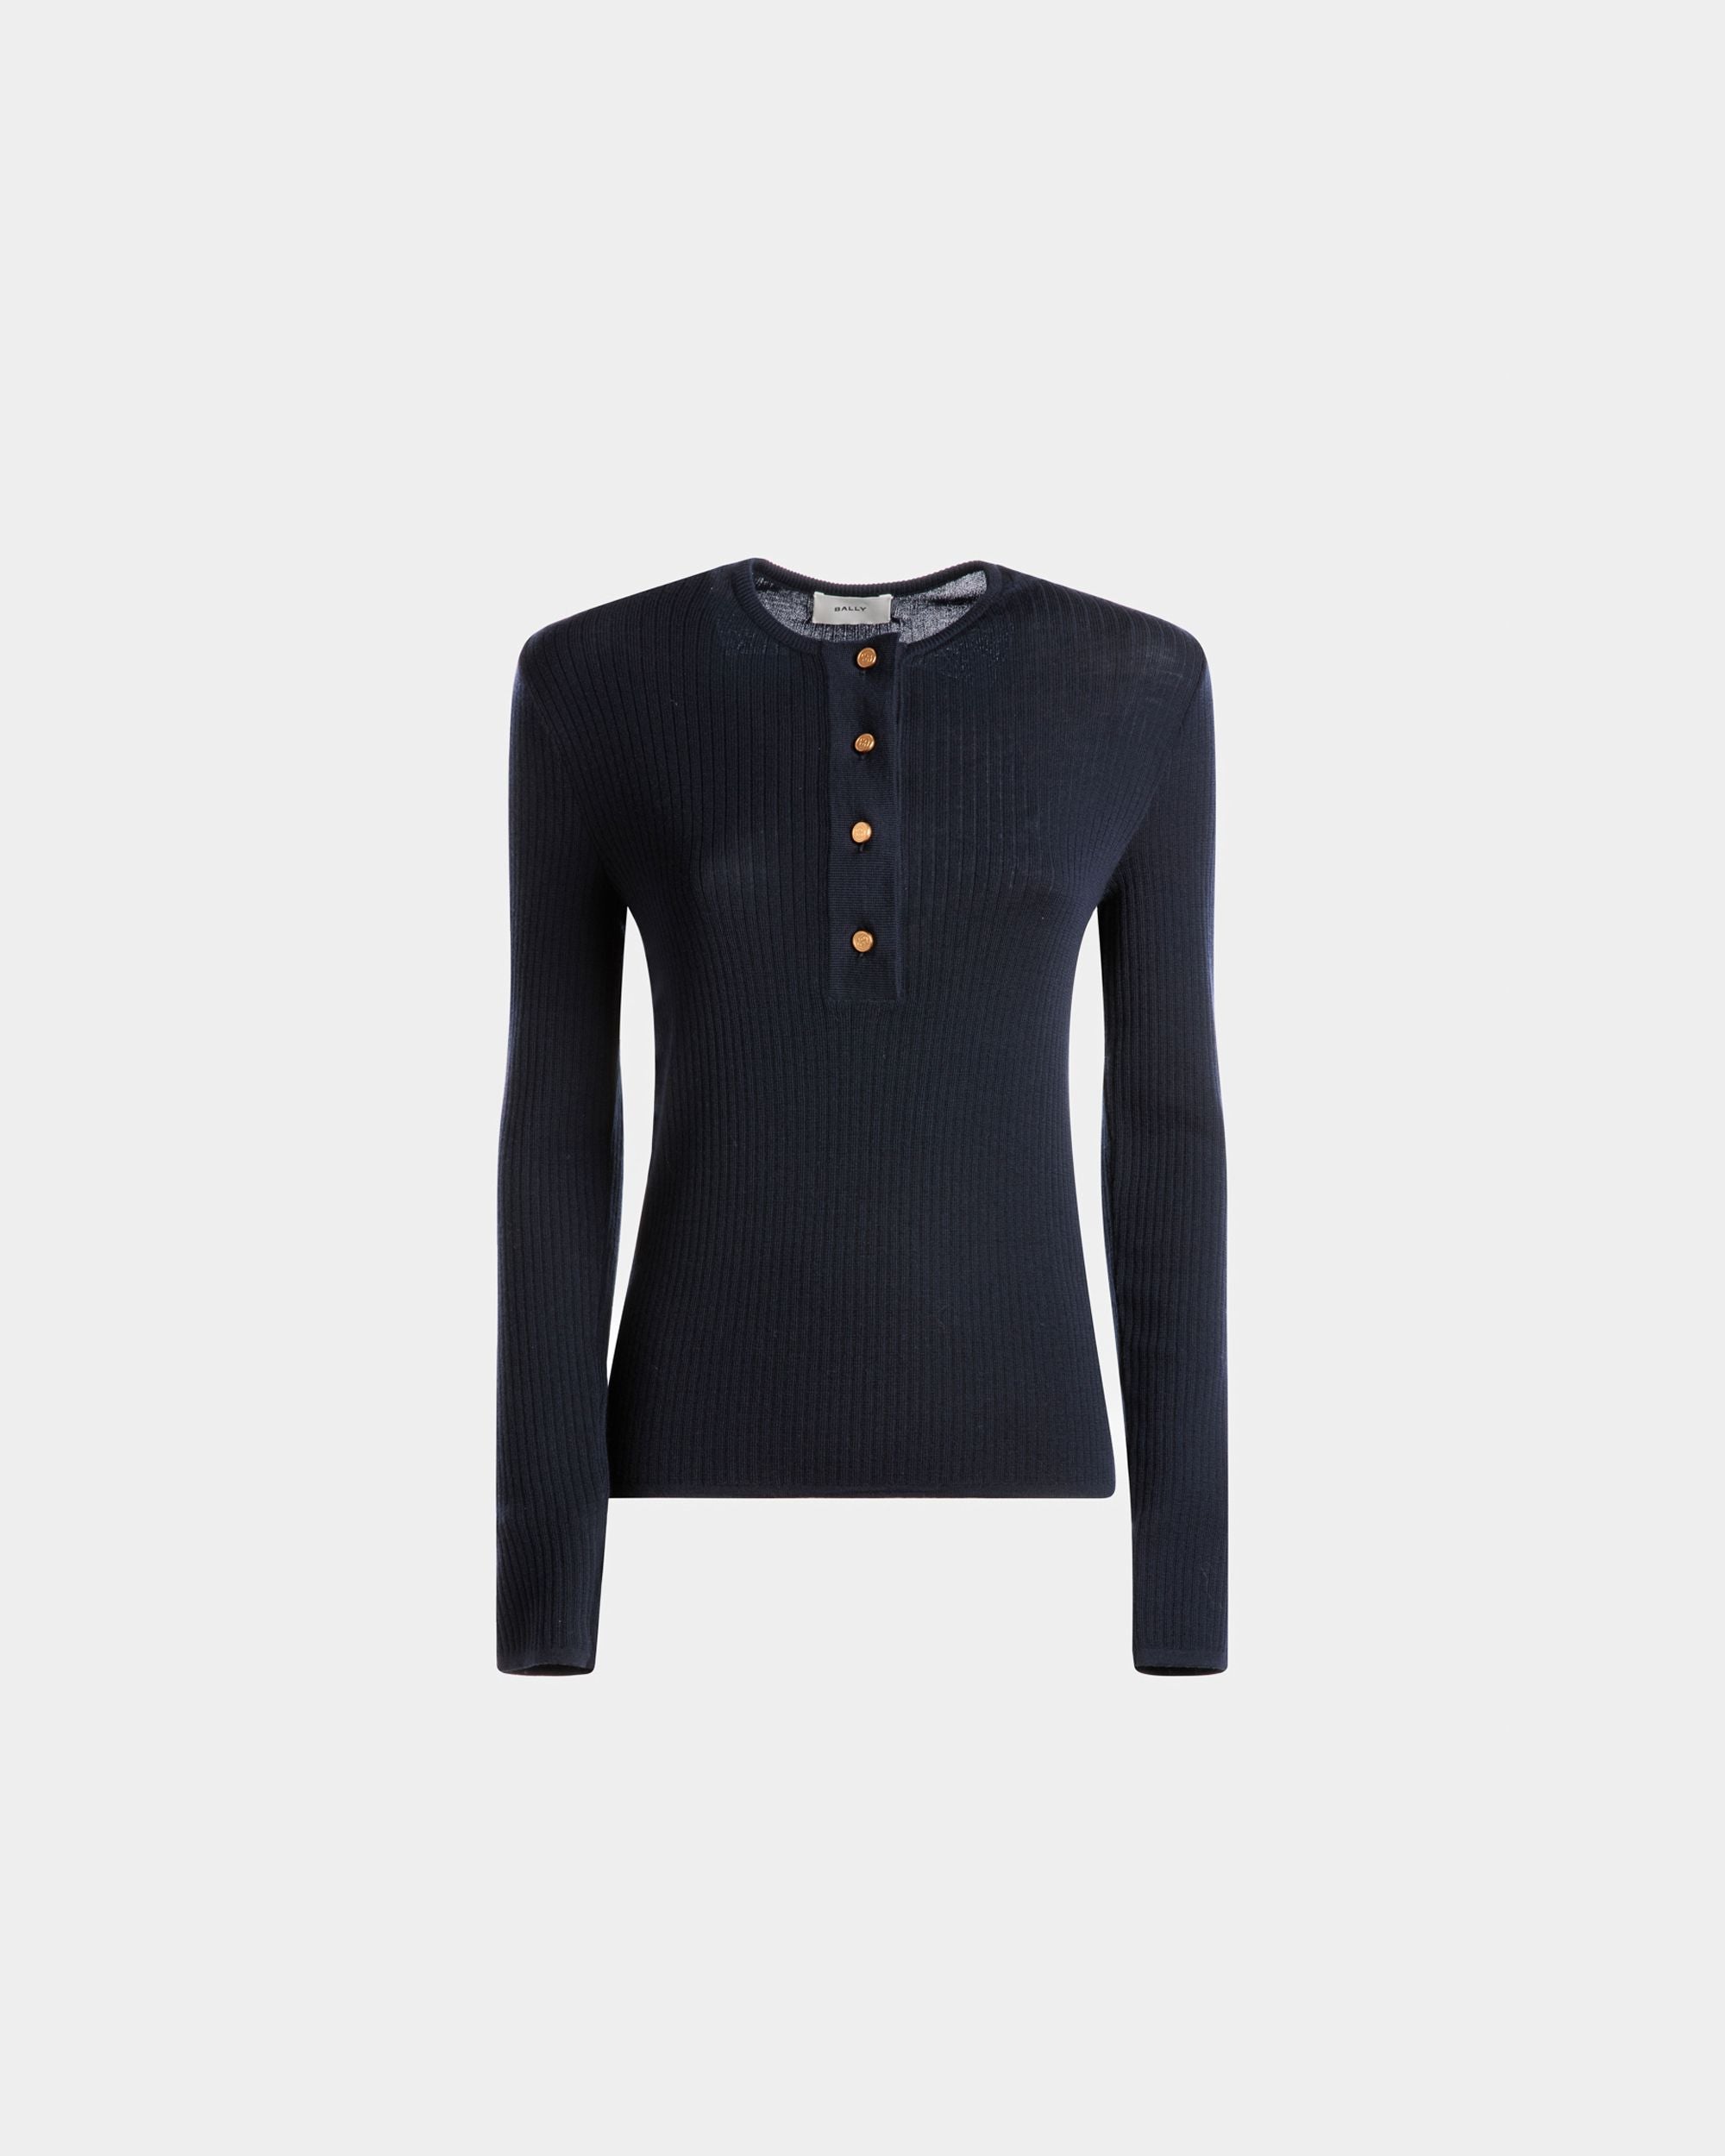 Knitted Henley Top | Women's Top | Ink Wool | Bally | Still Life Front